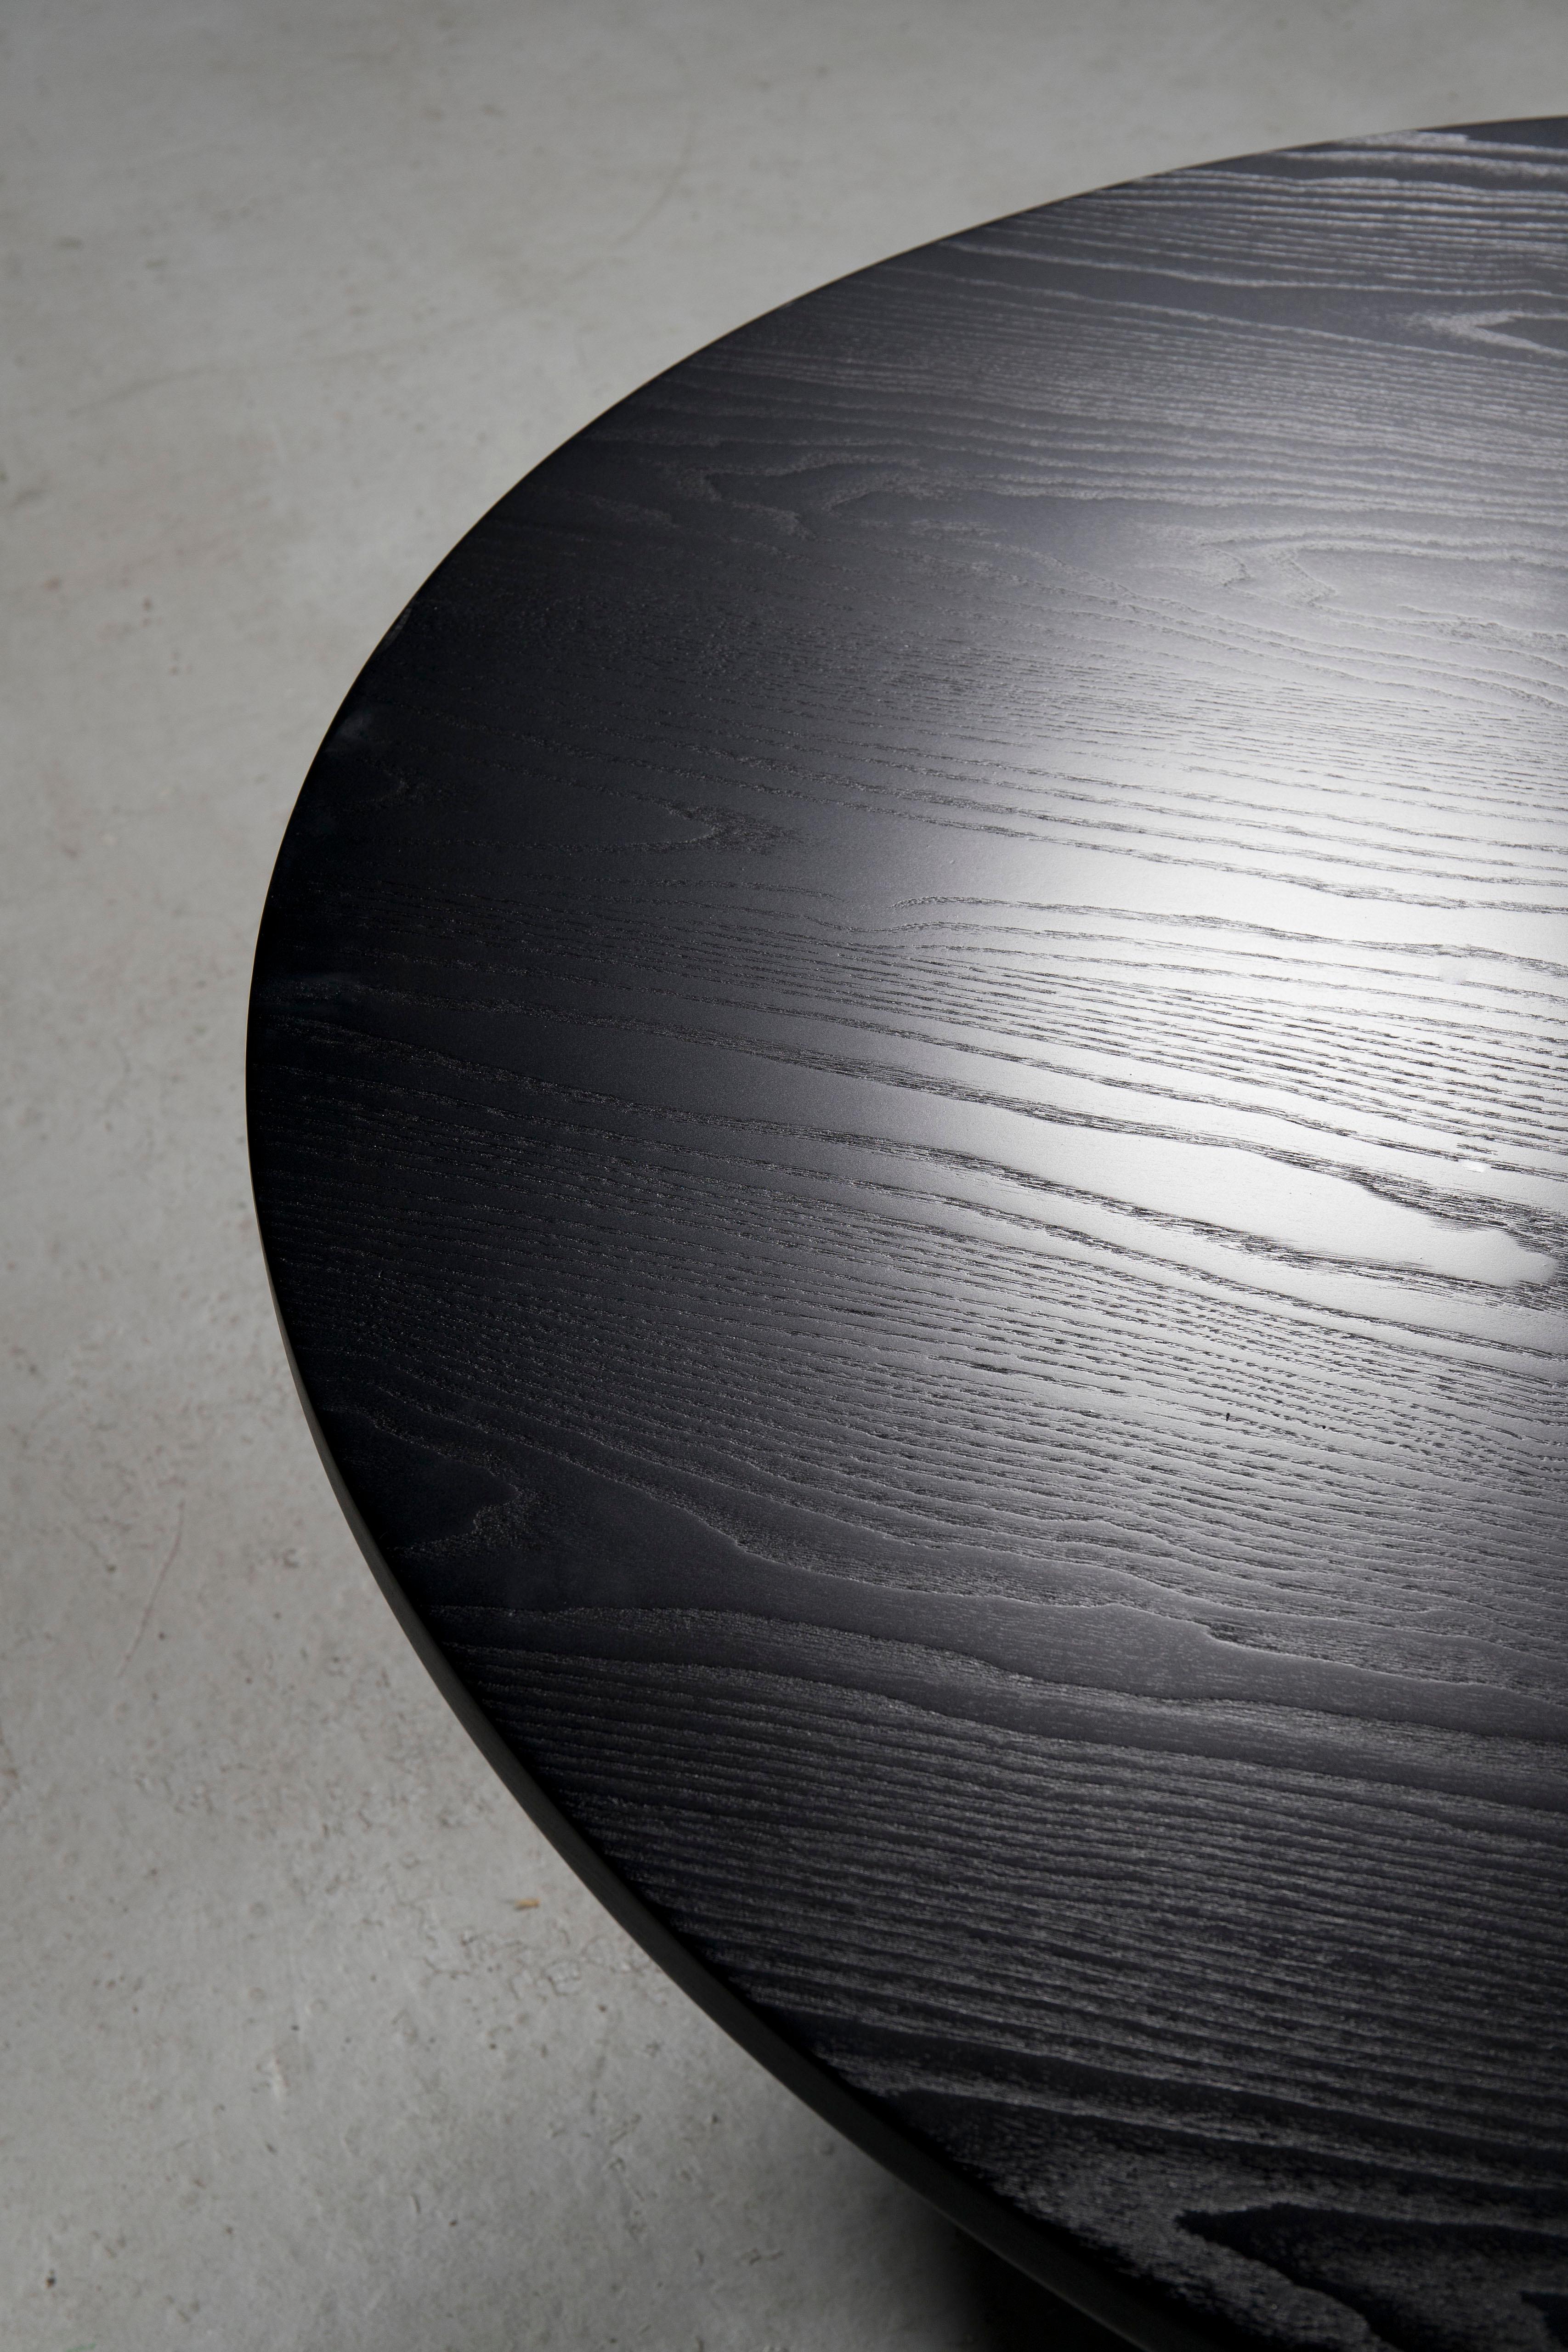 Hand sculpted and ebonized Ash round table with stack, laminated and carved base by contemporary artist Caleb Woodard, 2018.
This table can be viewed at my gallery - 532 W 25th St, NYC.